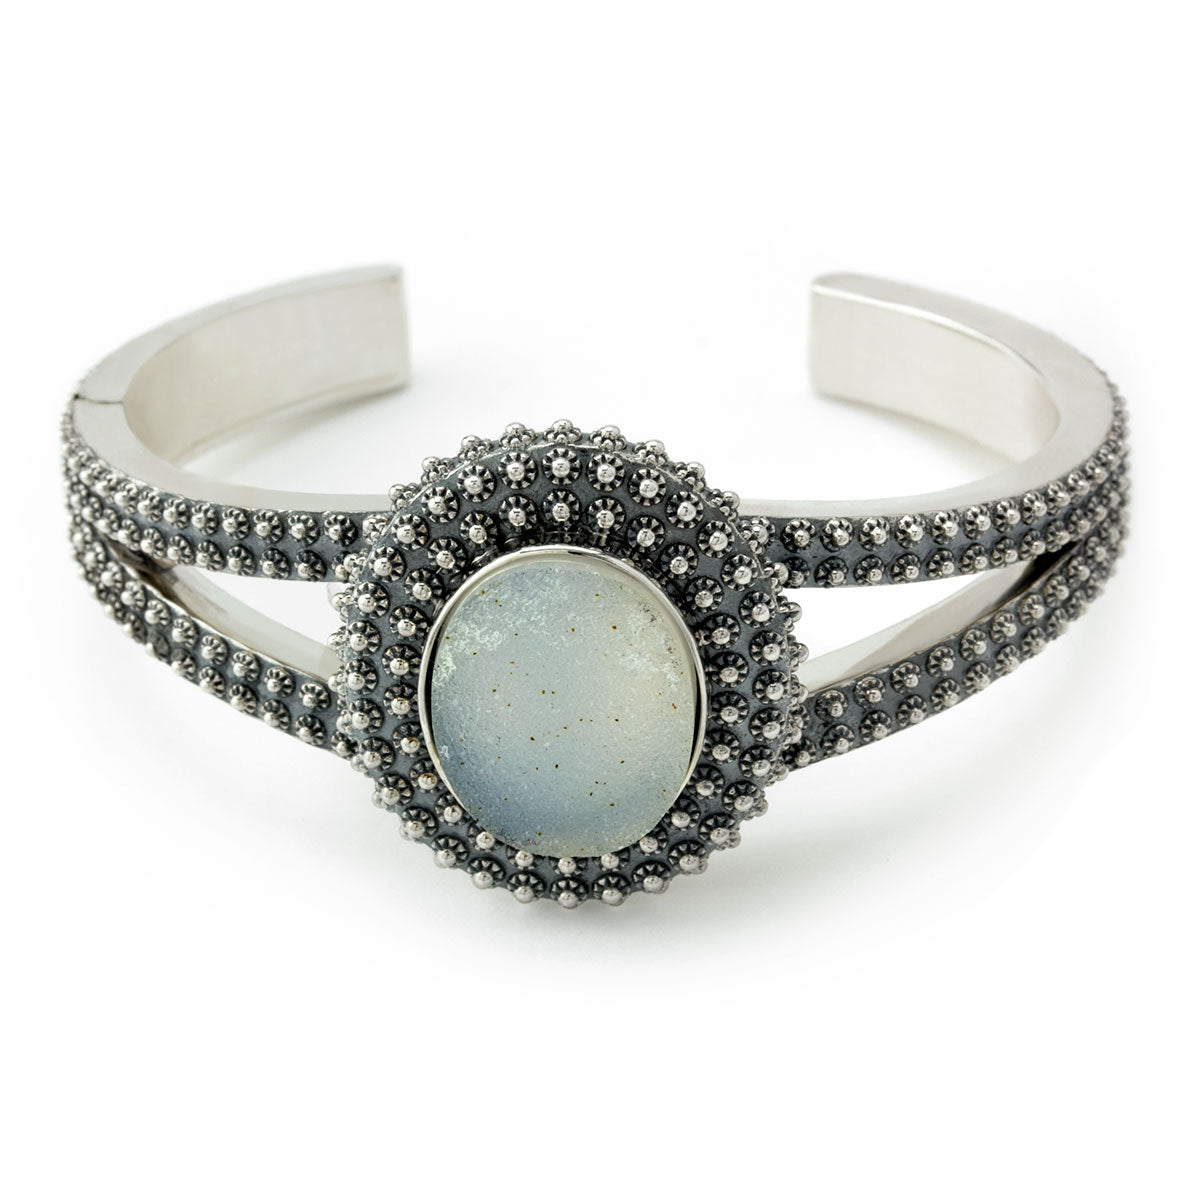 Textured Sterling Silver and Druzy Bracelet-610-668